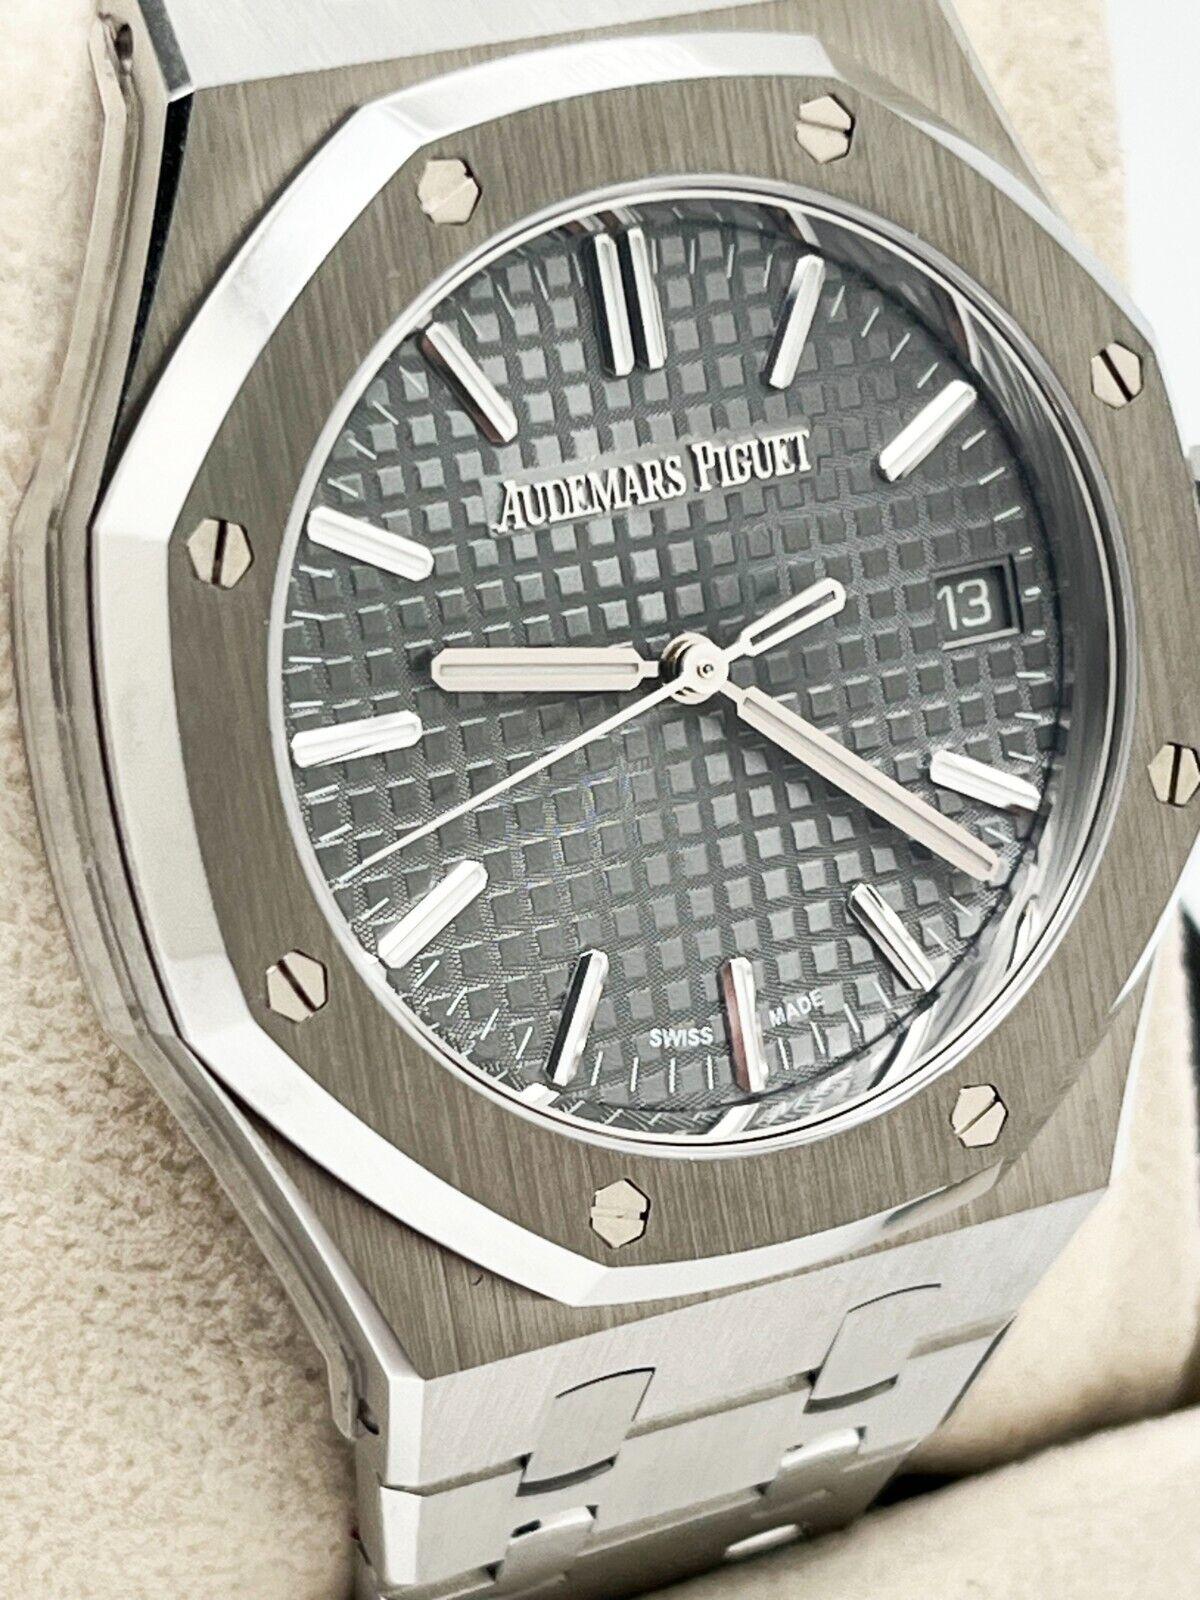 Style Number: 15550ST.OO.1356ST.03
 
Model: Royal Oak
 
Case Material: Stainless Steel 
 
Band: Stainless Steel
 
Bezel:  Stainless Steel
 
Dial: Grey
 
Face: Sapphire Crystal 
 
Case Size: 37mm 
 
Includes: 
-Audemars Box & Paper
-Certified